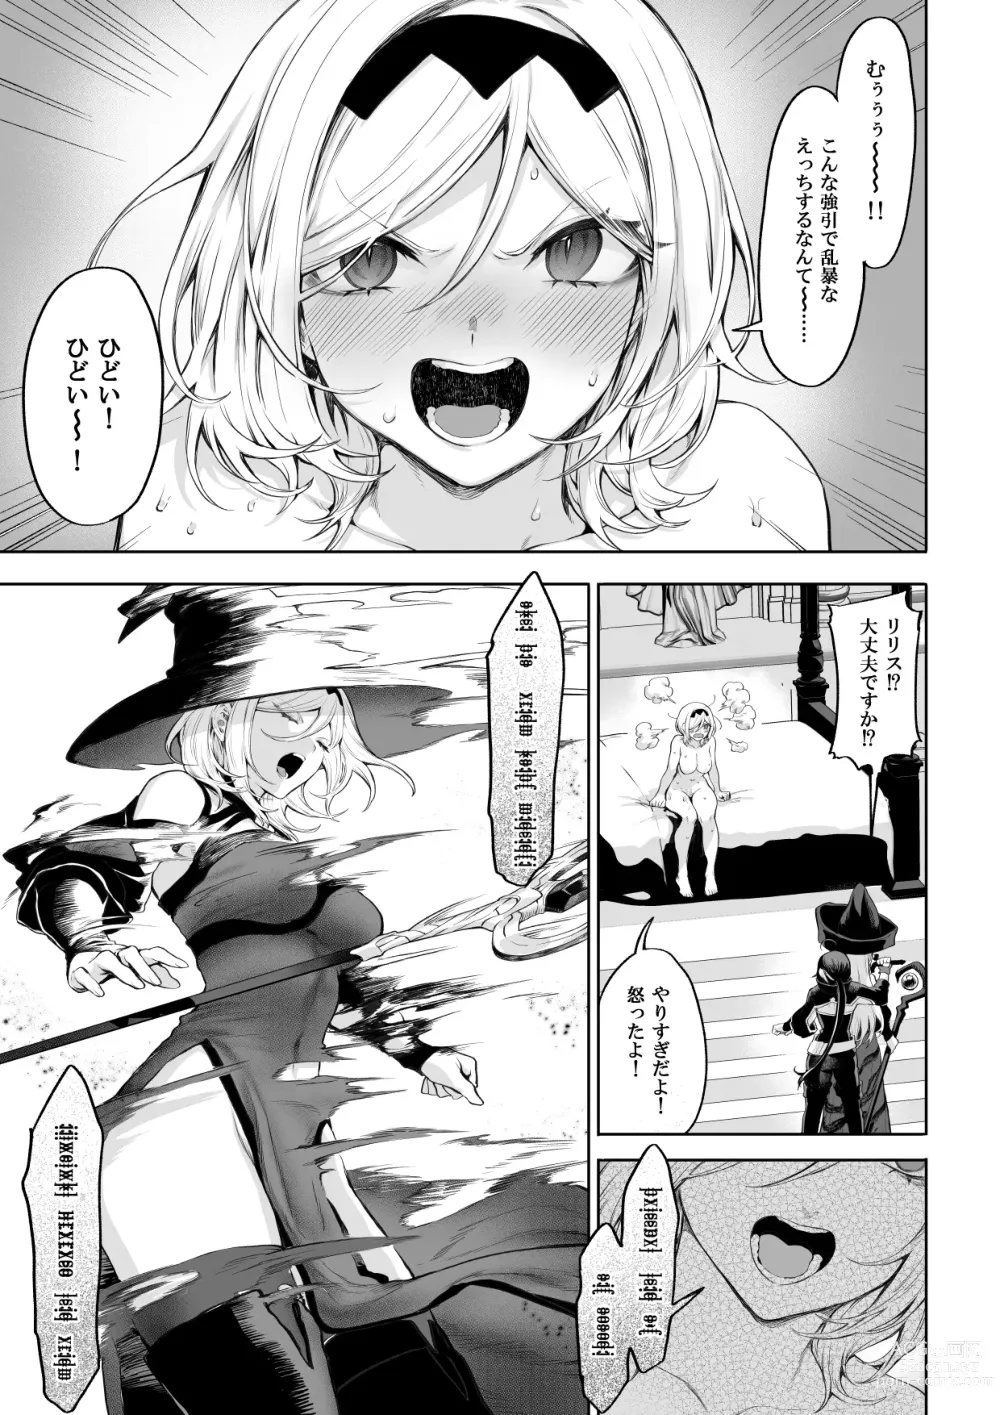 Page 134 of doujinshi 戦乙女といくさごと！〜女魔法使い編〜